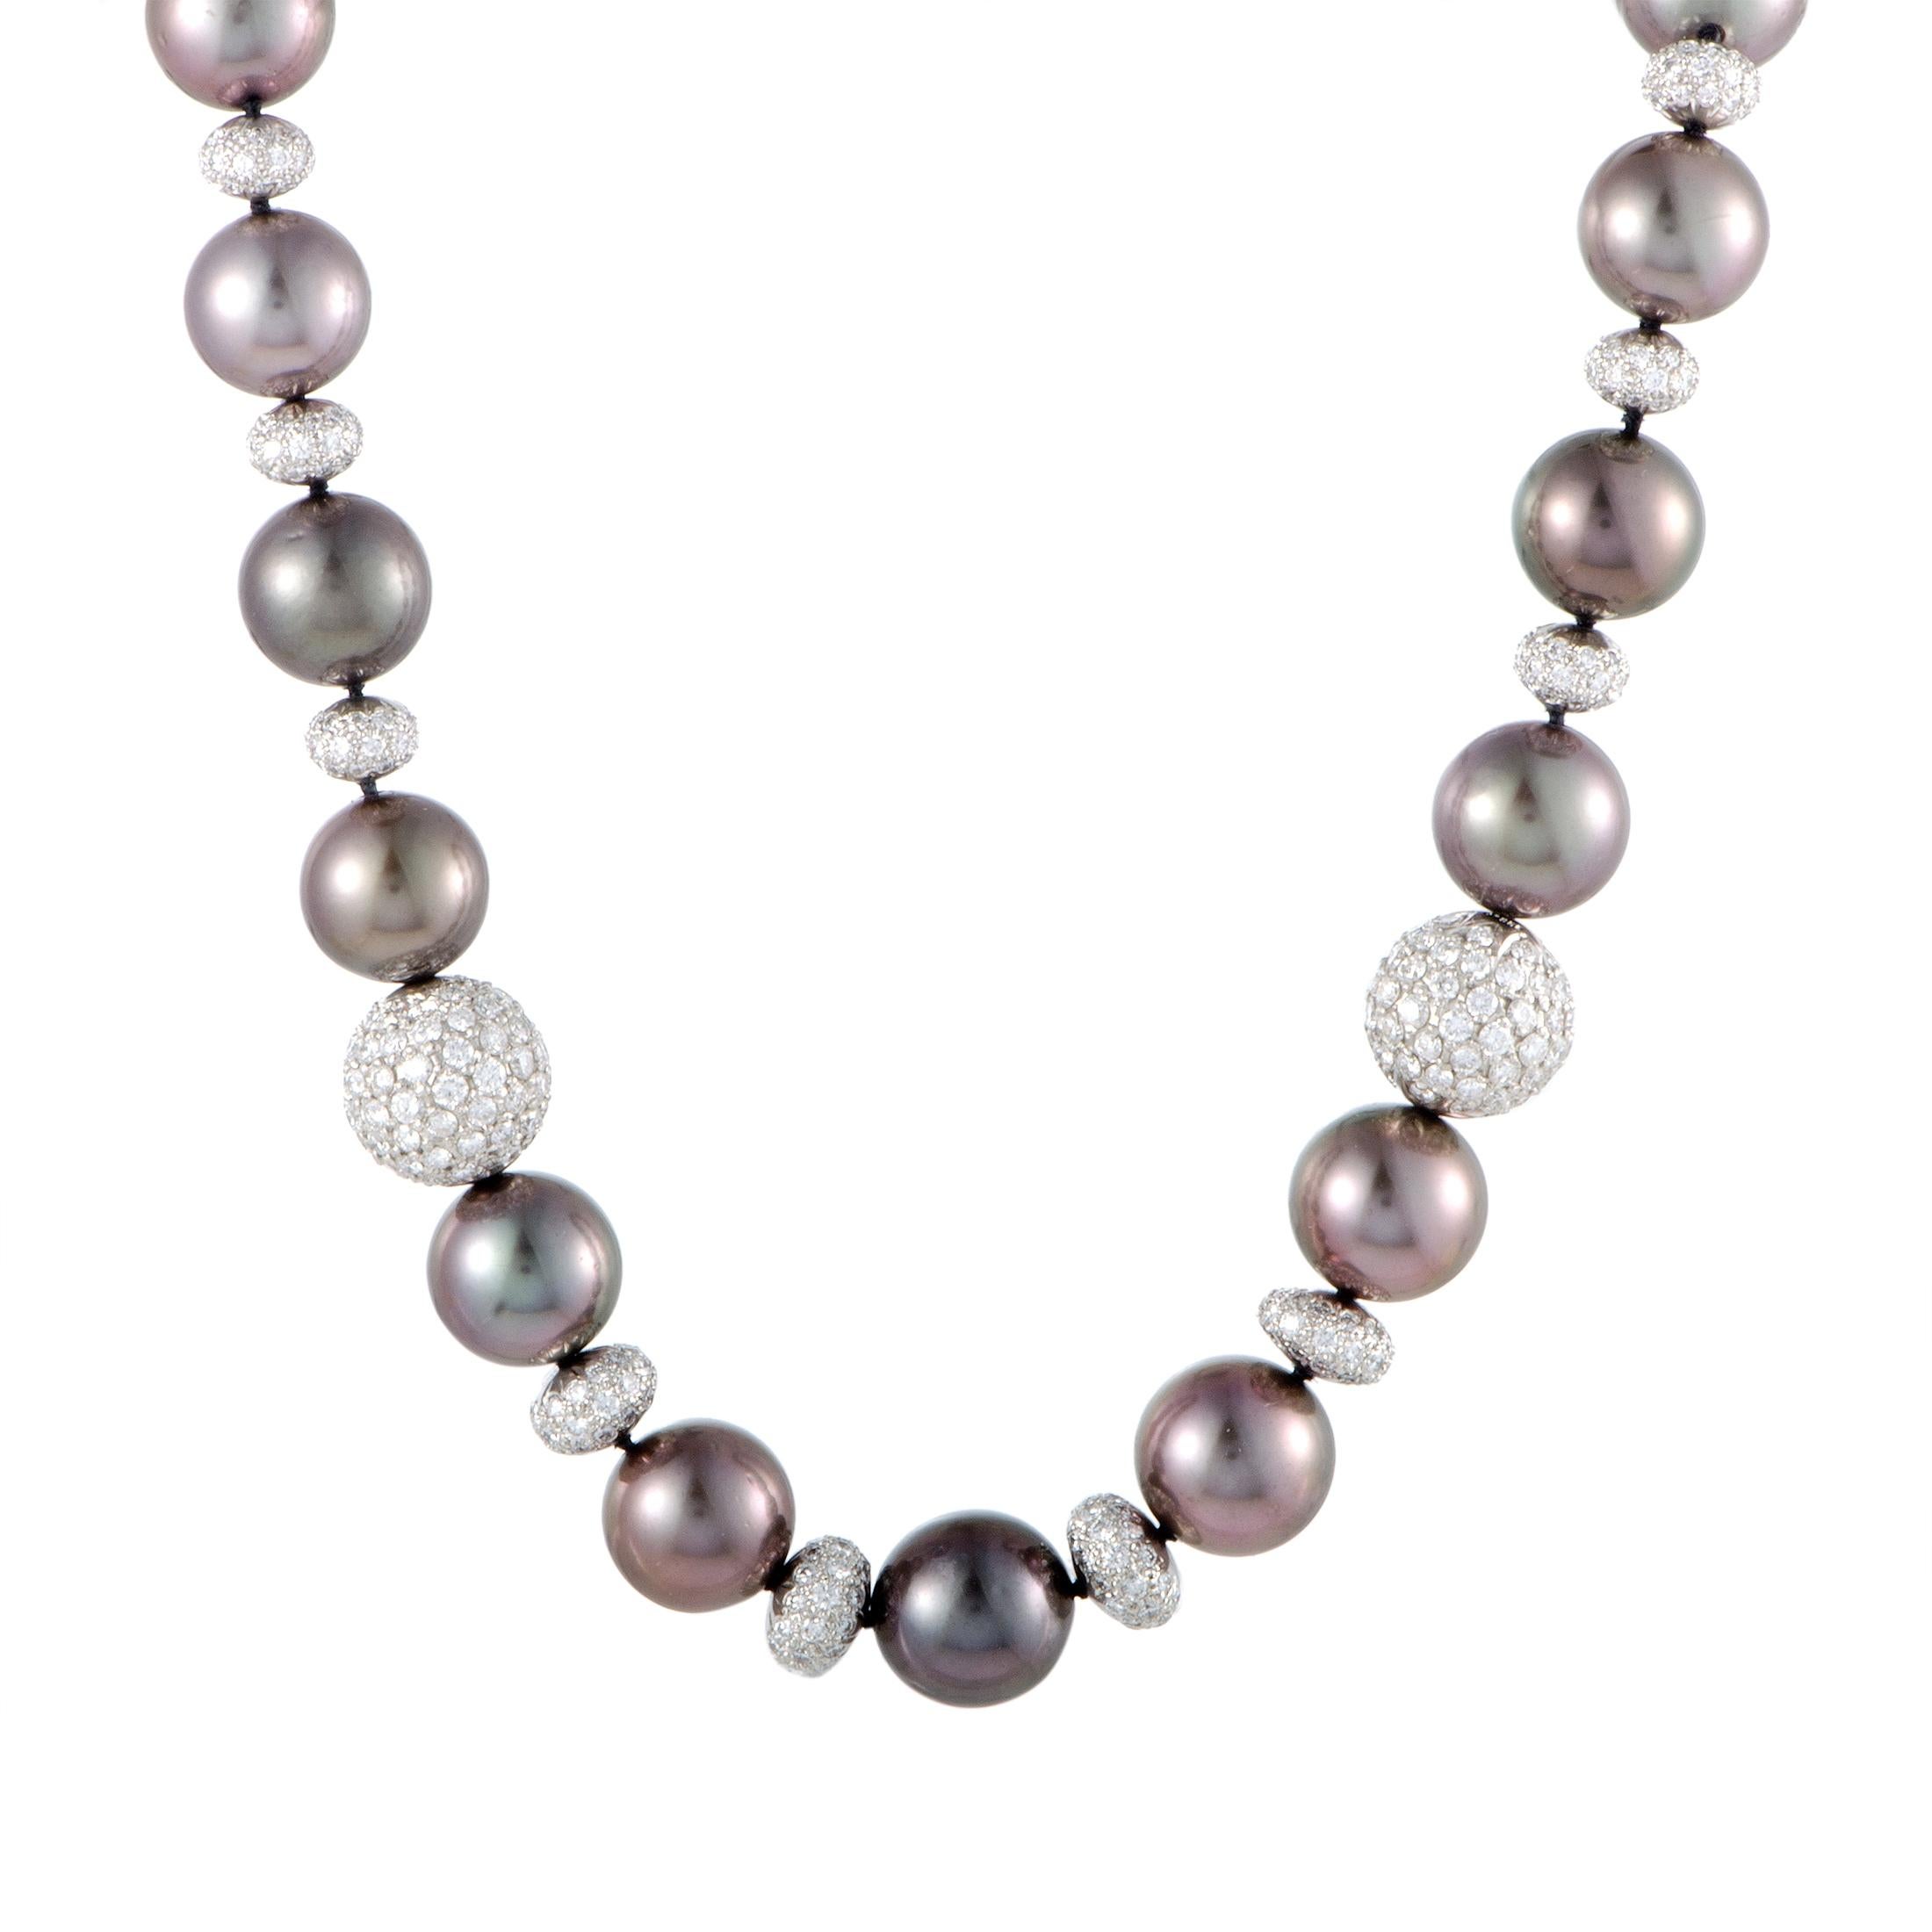 Platinum Diamond Pave Beads and Tahitian Pearls Riviere Necklace